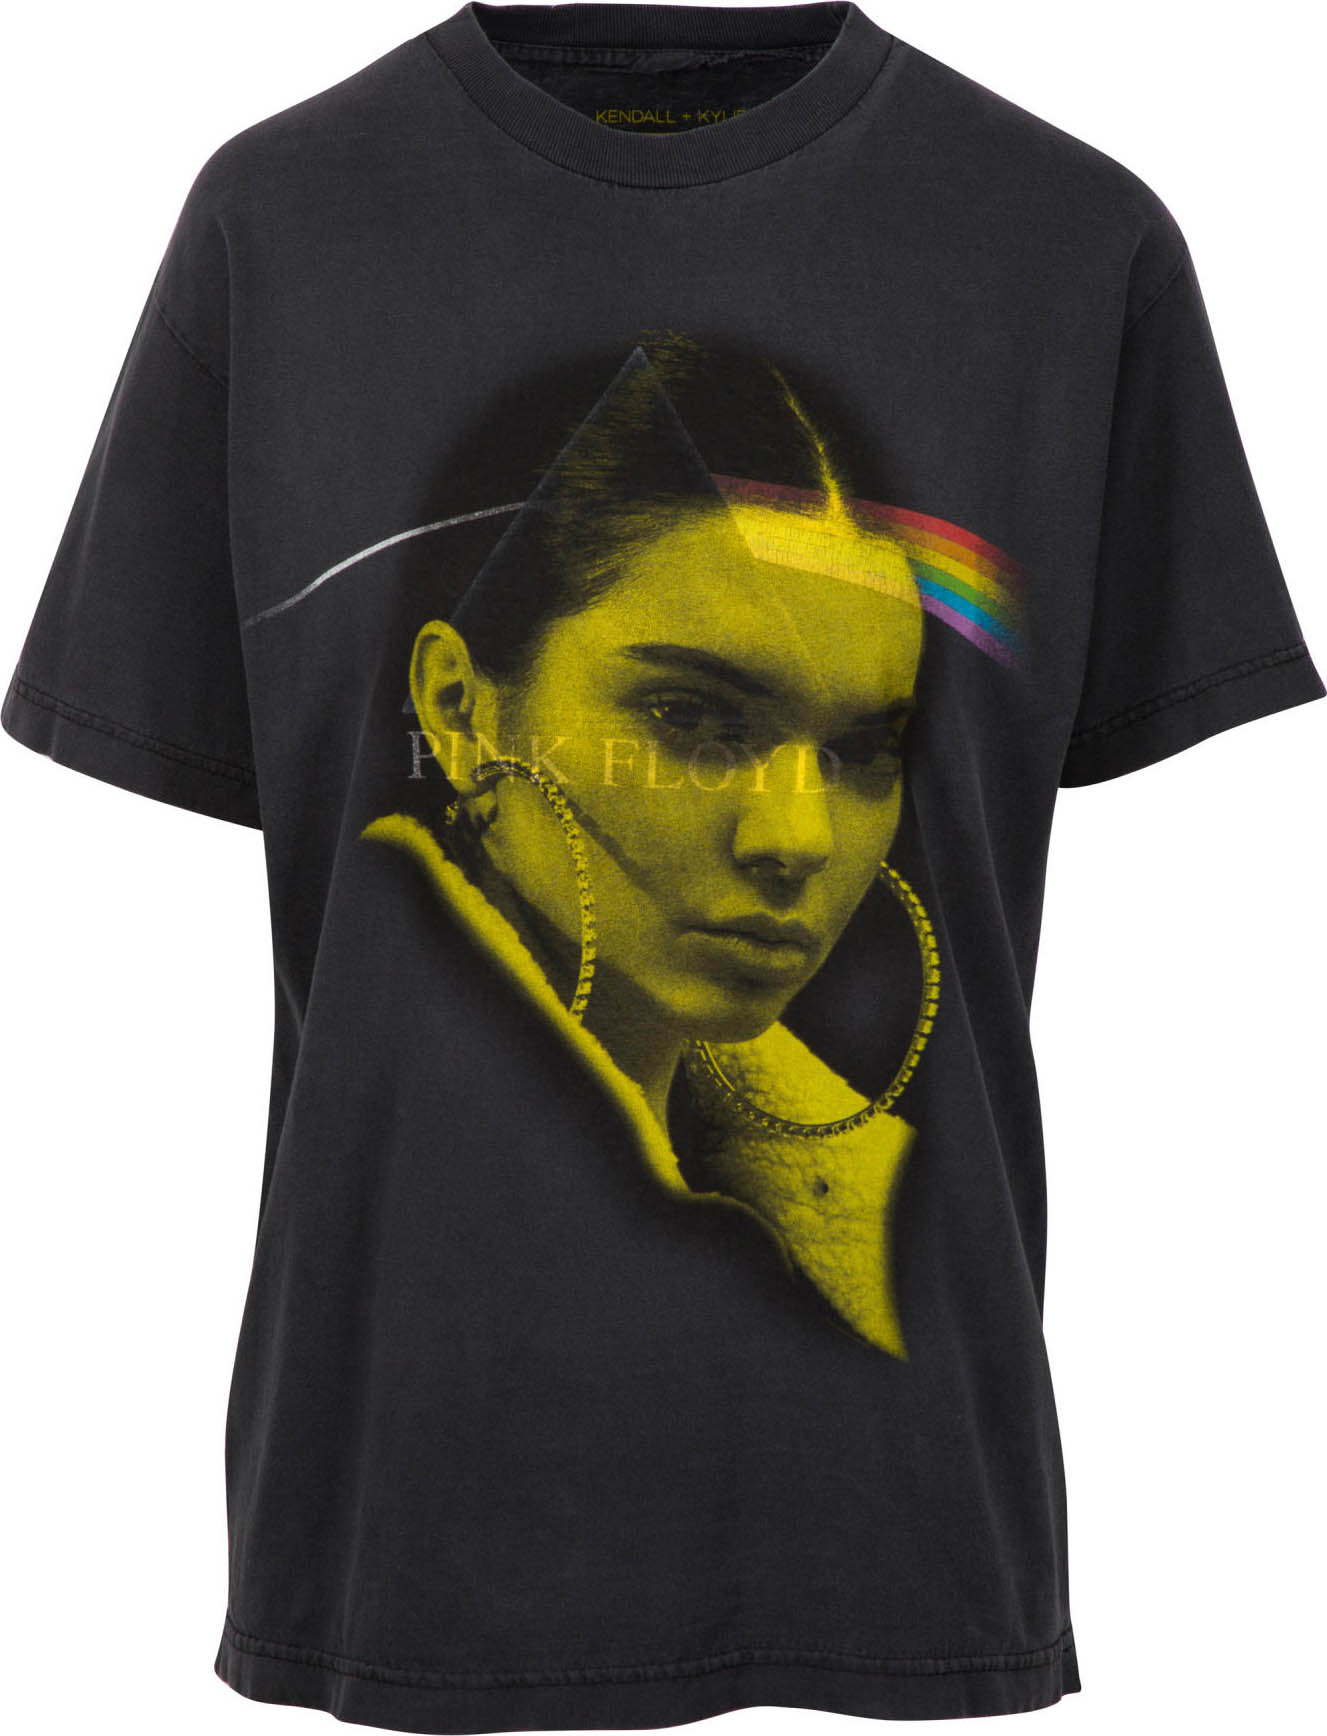 notification Religious Formulate Kendall, Kylie Jenner discontinue Pink Floyd T-shirt | News | Floydian  Slip™ | Syndicated Pink Floyd radio show